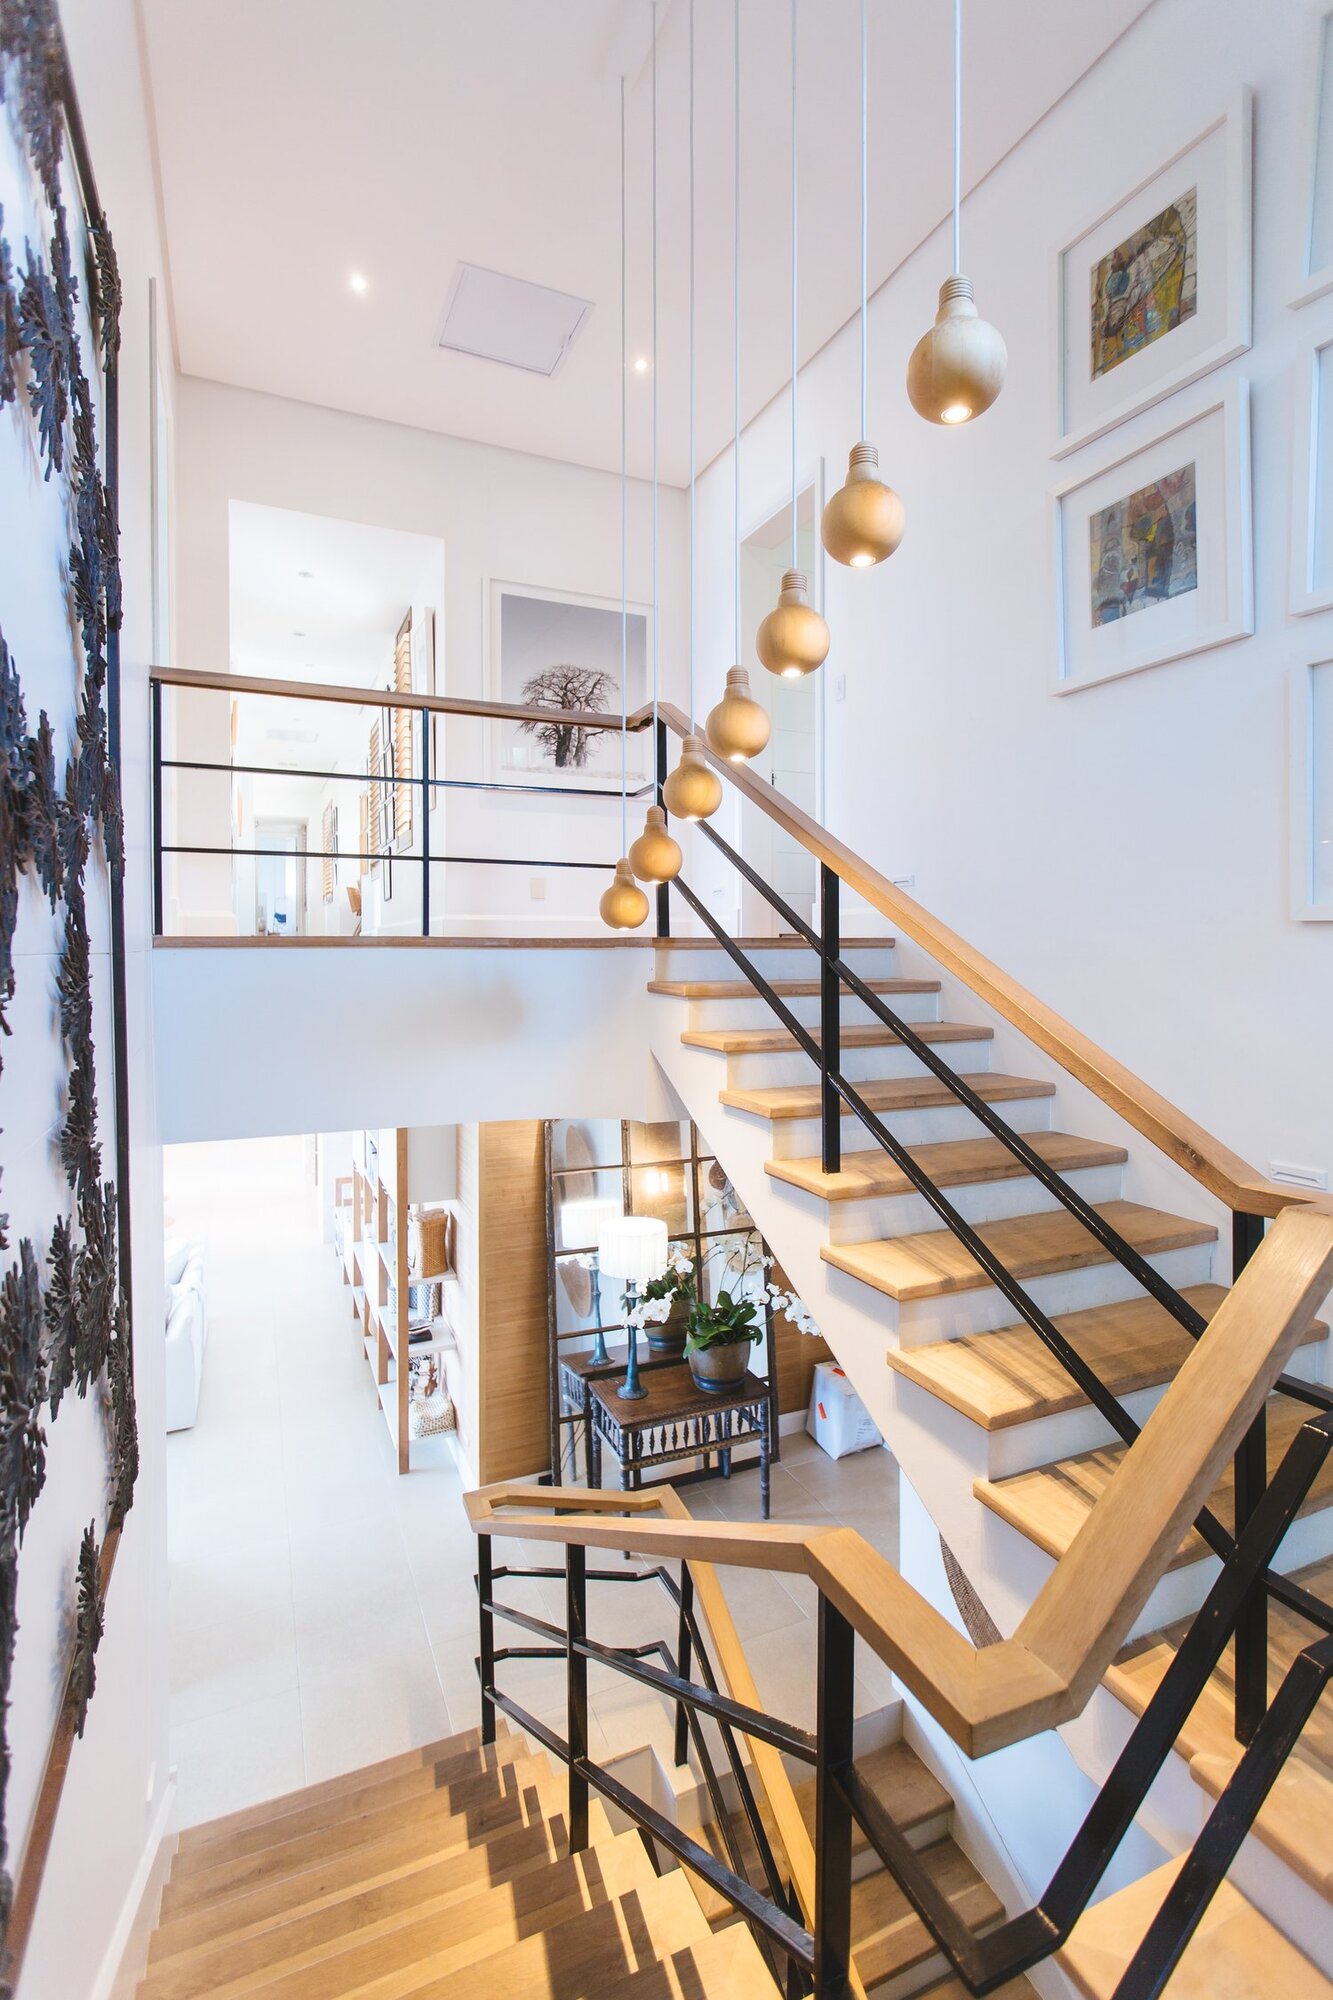 Large open staircase with modern wood and metal rails